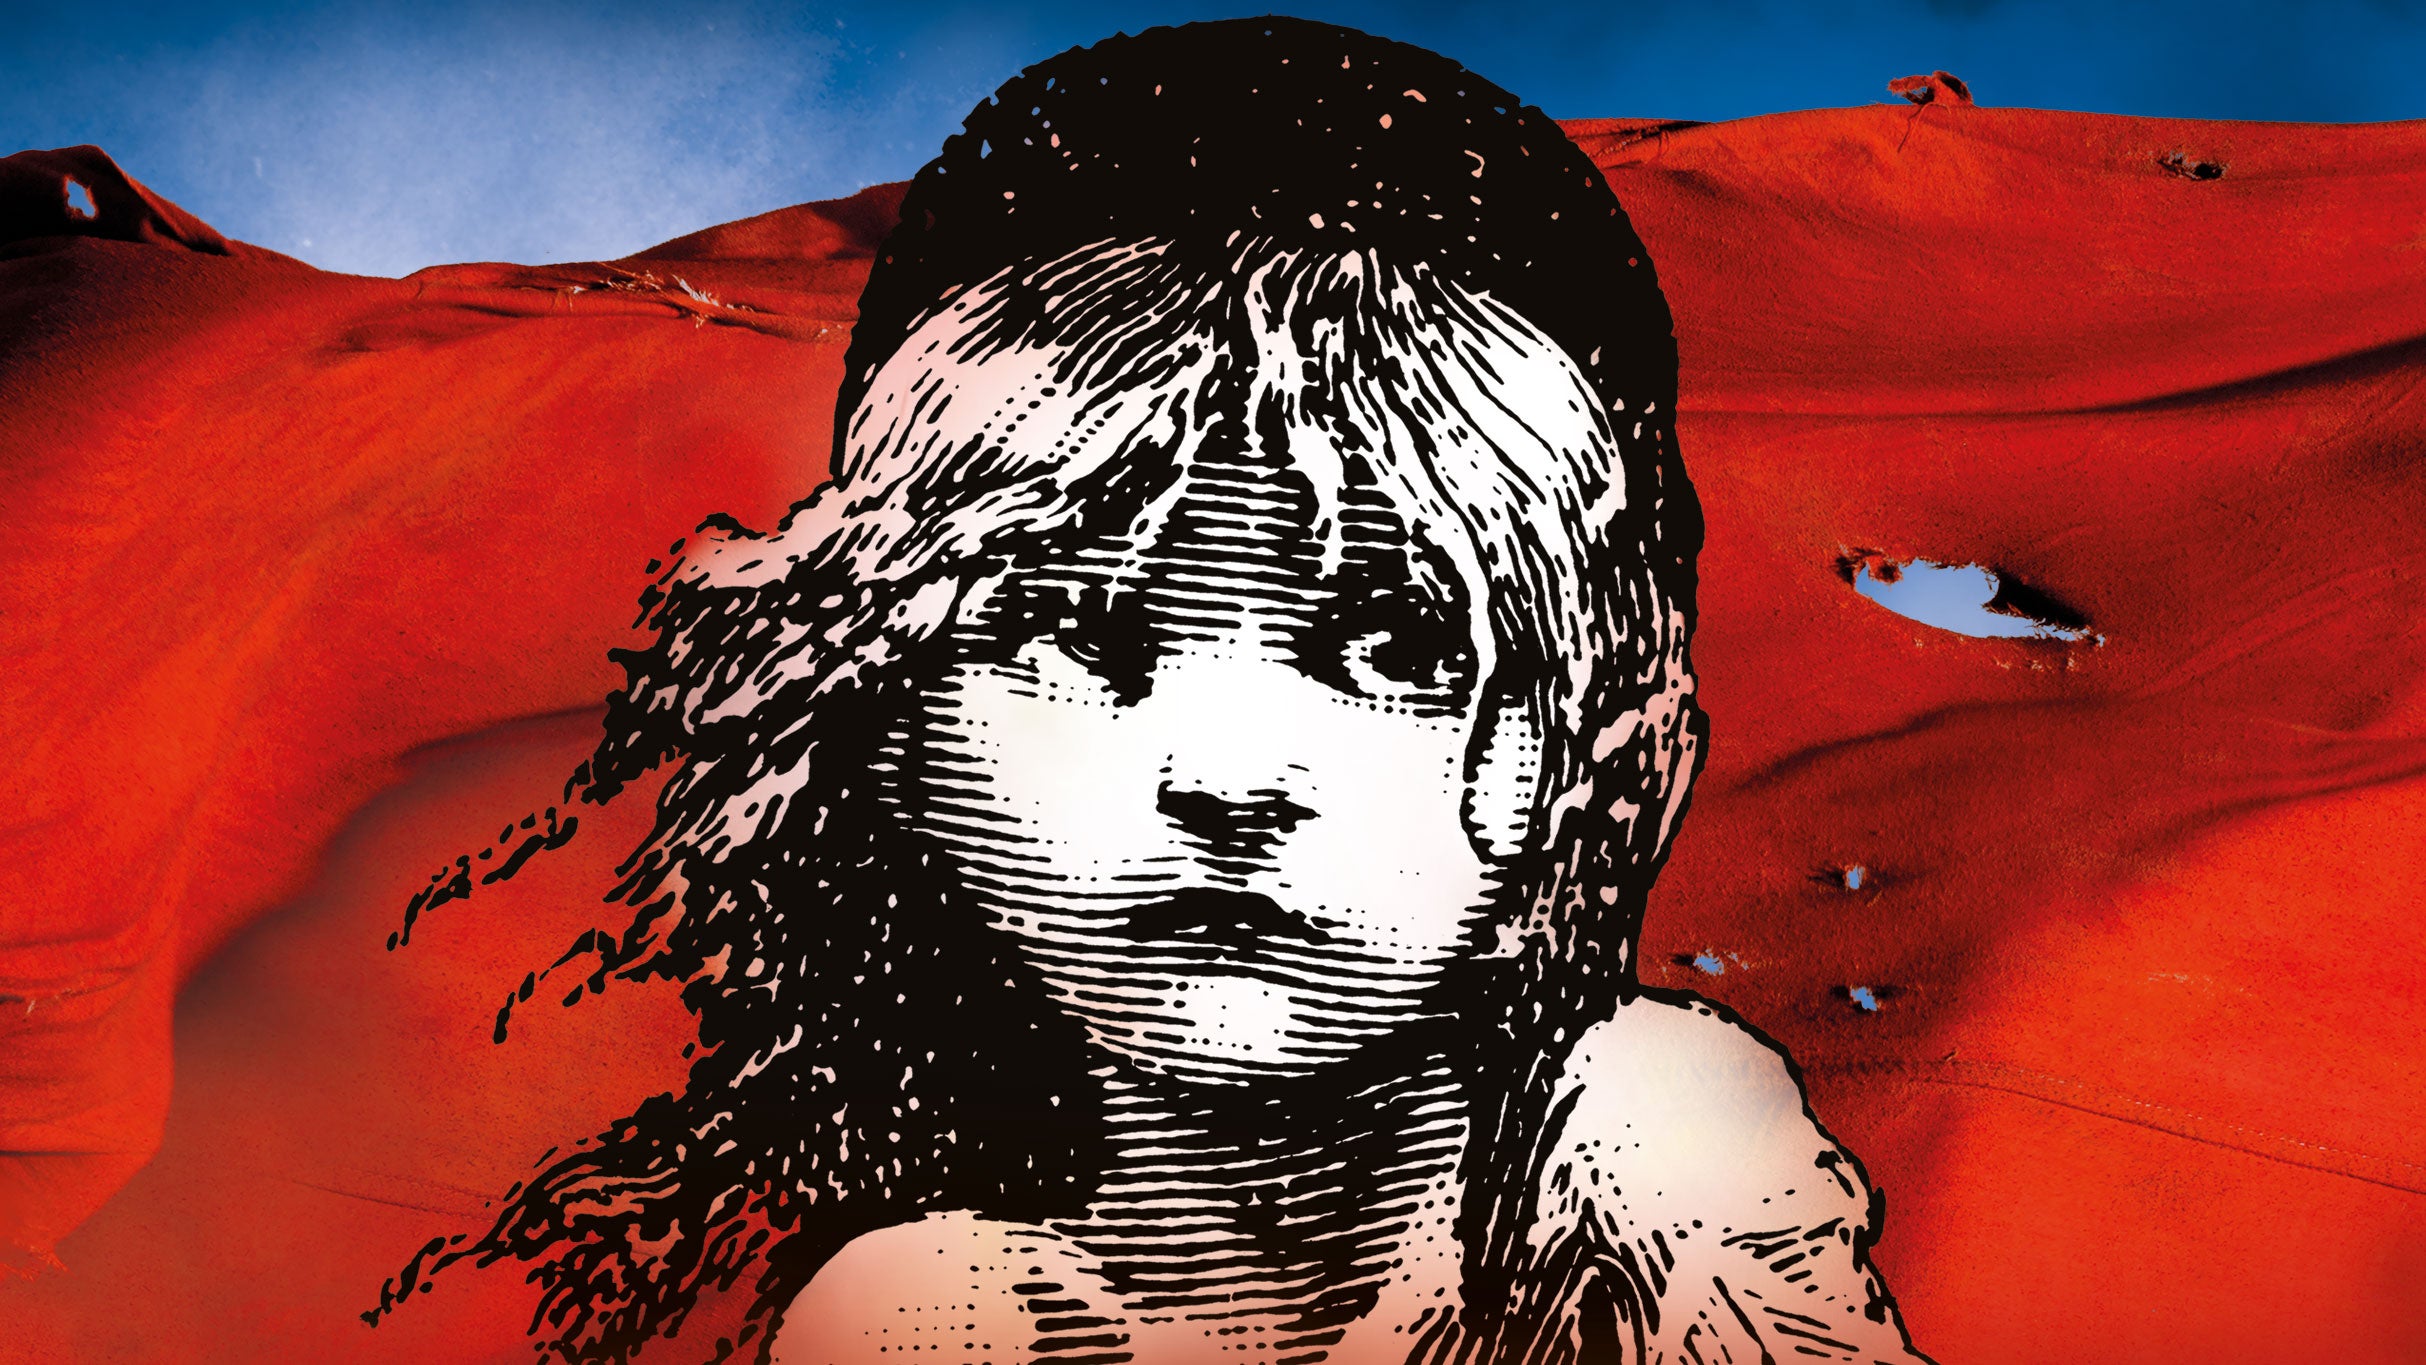 Les Miserables (Touring) in Houston promo photo for Exclusive presale offer code